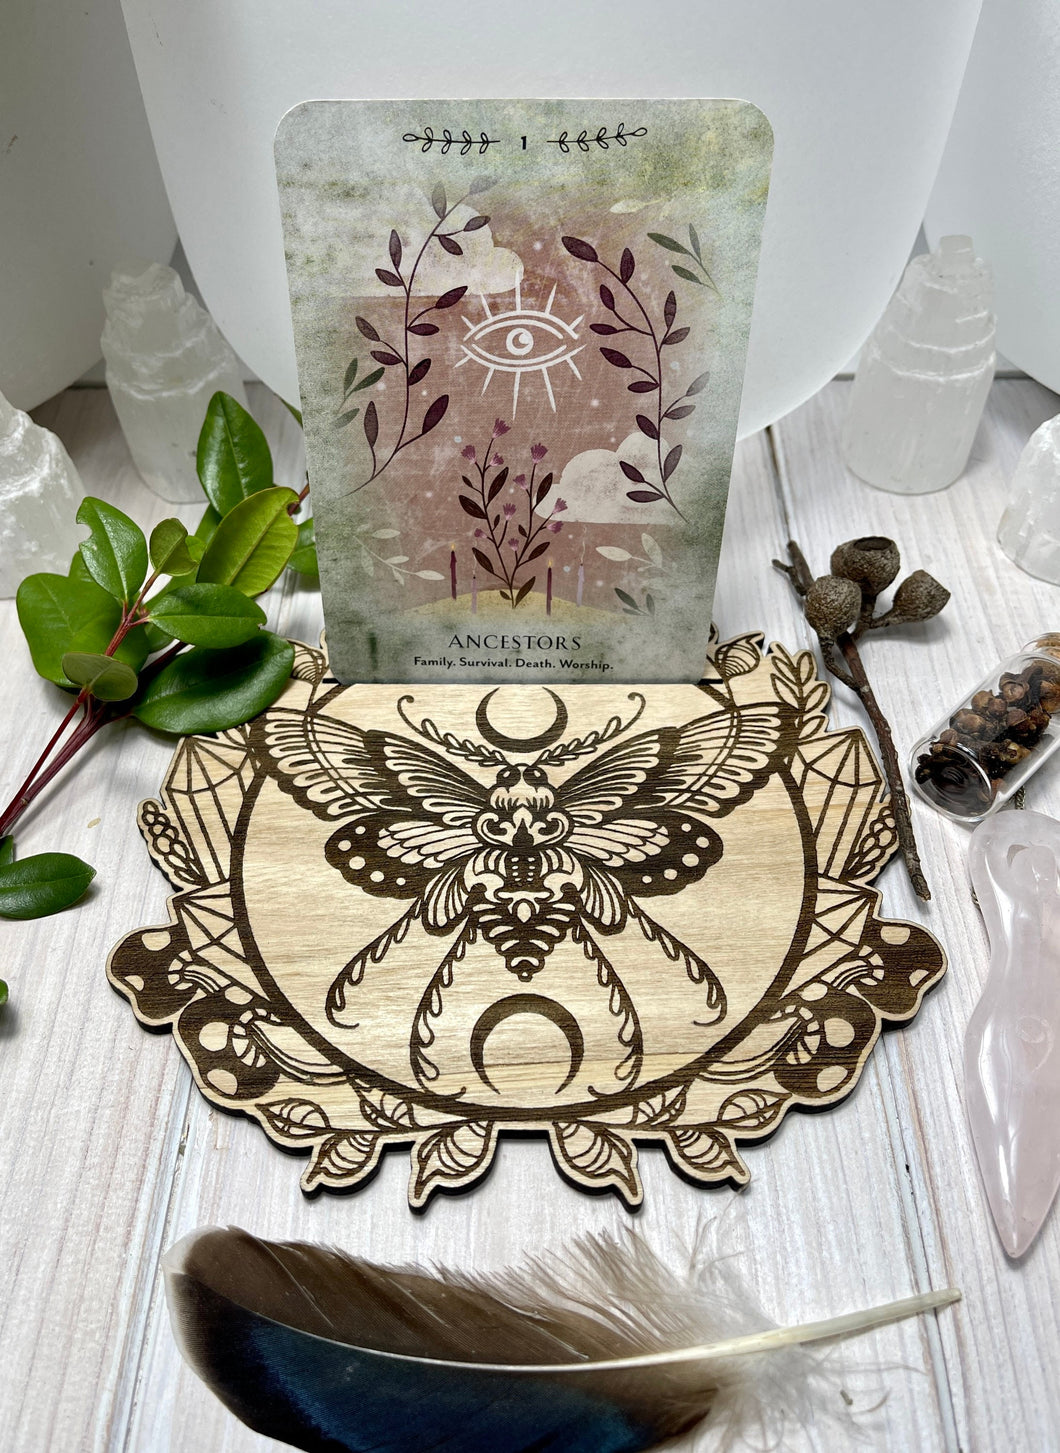 Moth + Crystal Oracle, tarot, message card holder - amazing for setting intentions, Daily Messages, affirmation cards.